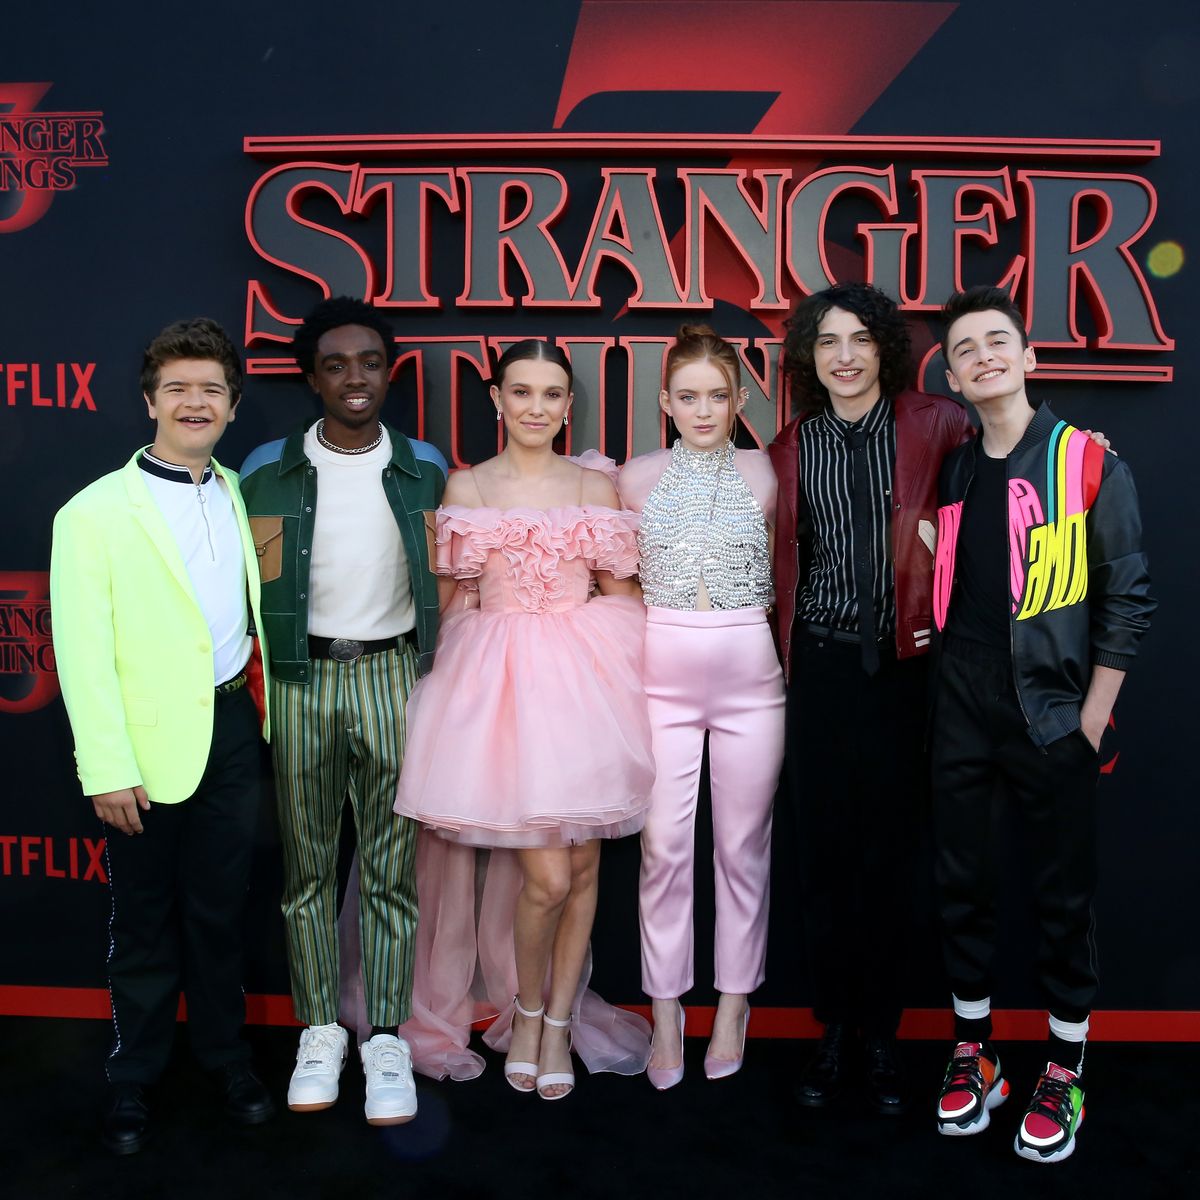 IMDb - Stranger Things stars in and out of costume. 👉